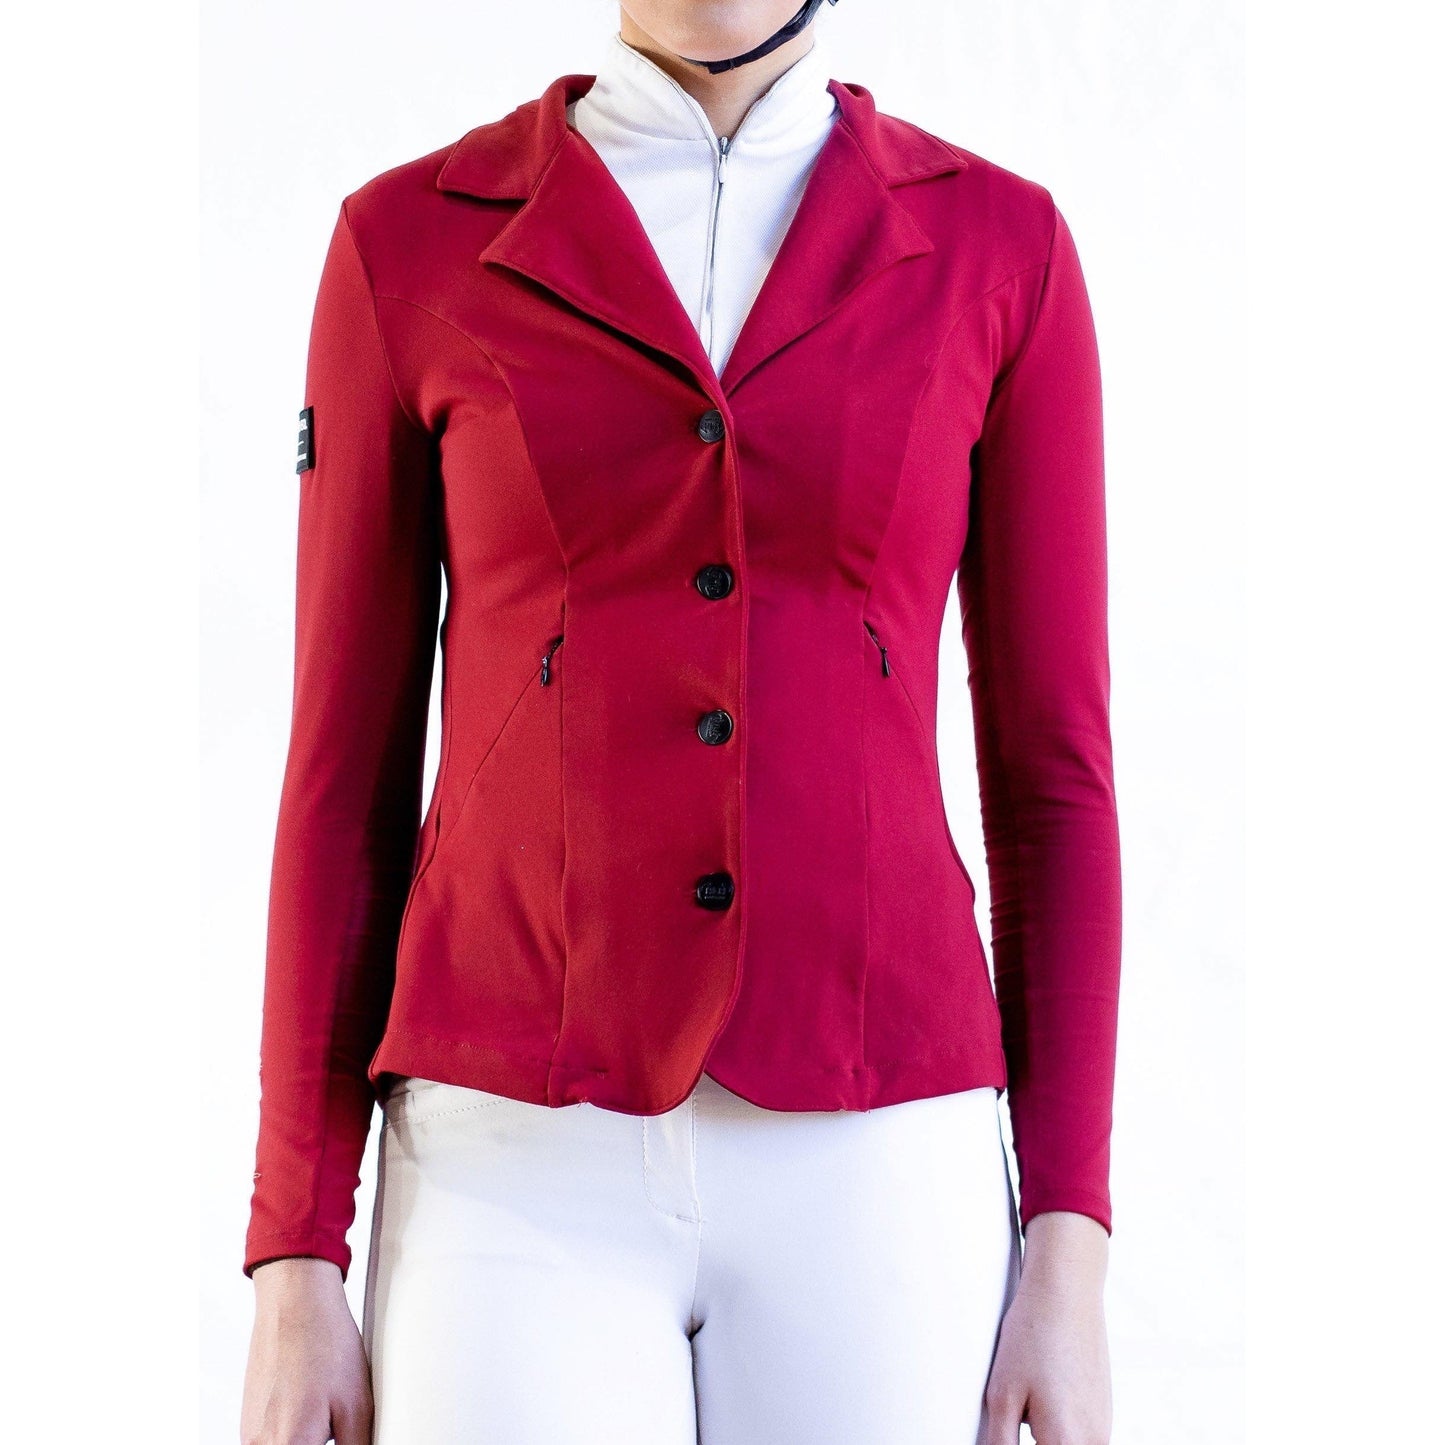 HLH Equestrian Apparel Second Skin Show Jacket-Southern Sport Horses-The Equestrian